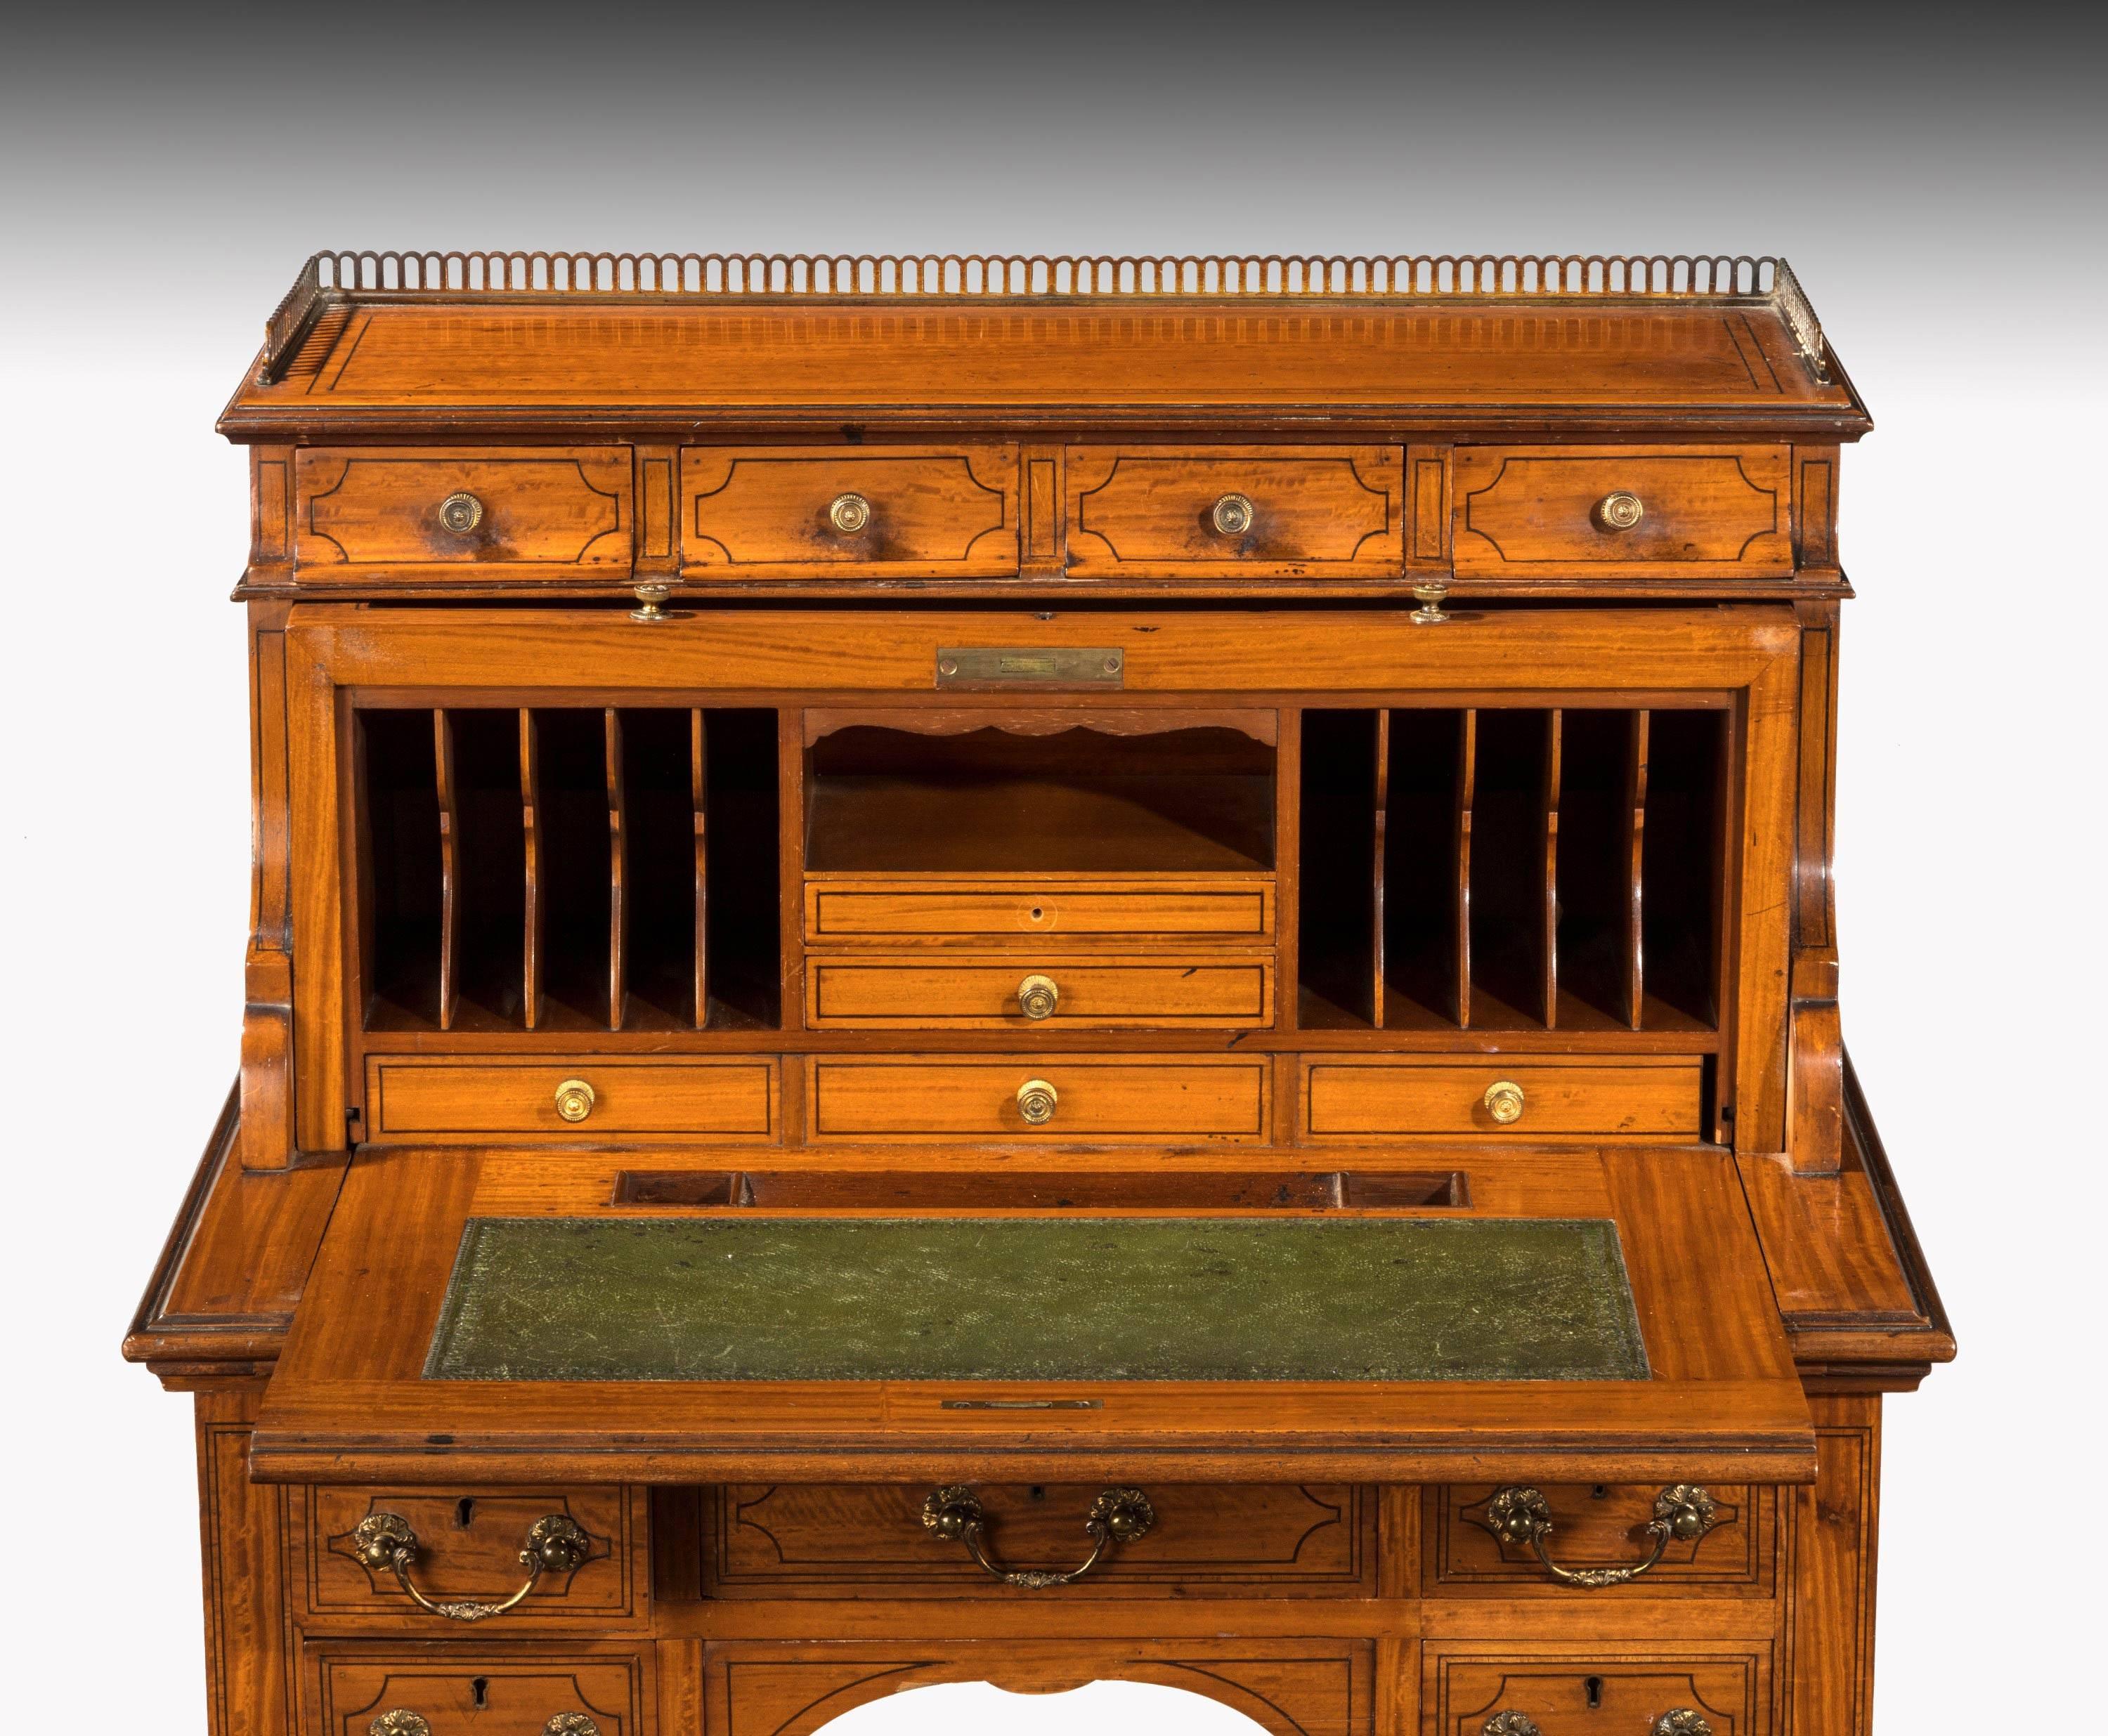 Edwardian Period Satinwood and Mahogany Ladies Cylinder Bureau In Good Condition For Sale In Peterborough, Northamptonshire